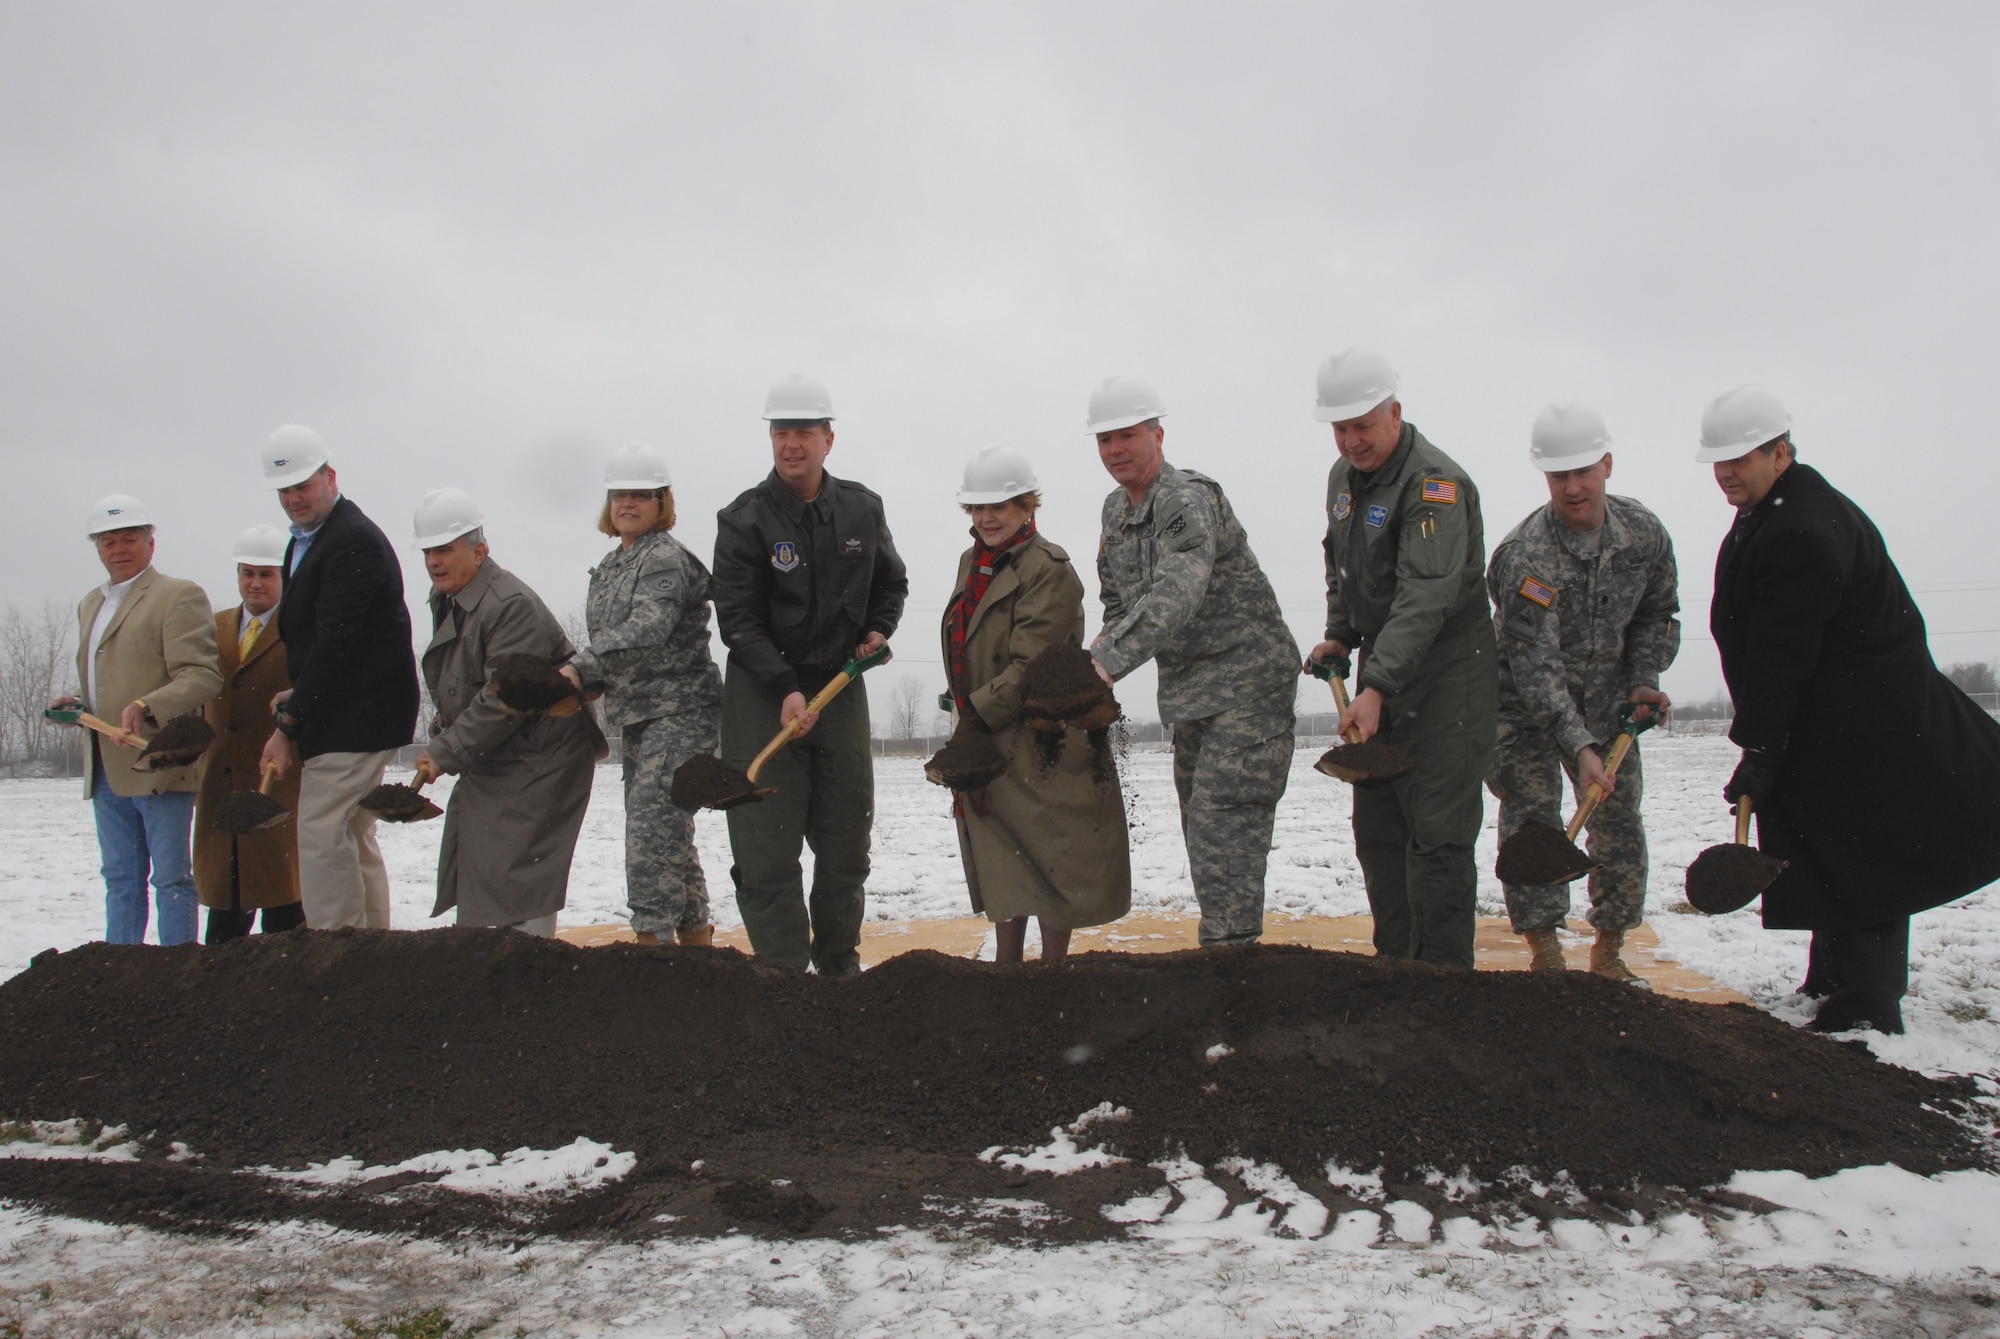 Dignitaries and VIP?s gather for a ground breaking ceremony for an Armed Forces Reserve Center slated to be built at the Niagara Falls Air Reserve Station.  Left to right:  Mr. Ken Kramer, Vice President, TCI Inc., Mr. Brian Reitzel, Project Manager, TCI Inc., Mr. Josh Feldmann, Project Manager, U.S. Army Engineer, Buffalo District, Mr. Michael Hrywnak, Construction Representative, U.S. Army Engineer ,New York District, Col. Rosemary Kuca, Former Commander 865th Combat Support Hospital, U.S. Army Reserve, Col. Allan Swartzmiller, 914th Airlift Wing Commander, Congresswoman Louise Slaughter, Brig. Gen. Michael Smith, Deputy Commanding General 99th Regional Support Command, Col. Patrick Ginavan, 107th Airlift Wing Commander, Lt. Col. Daniel Snead, Commander U.S. Army Engineer , Buffalo District, Mr. Merrell Lane, President, Niagara Military Affairs Council. (AF Photo by SMS Ray Lloyd)	 